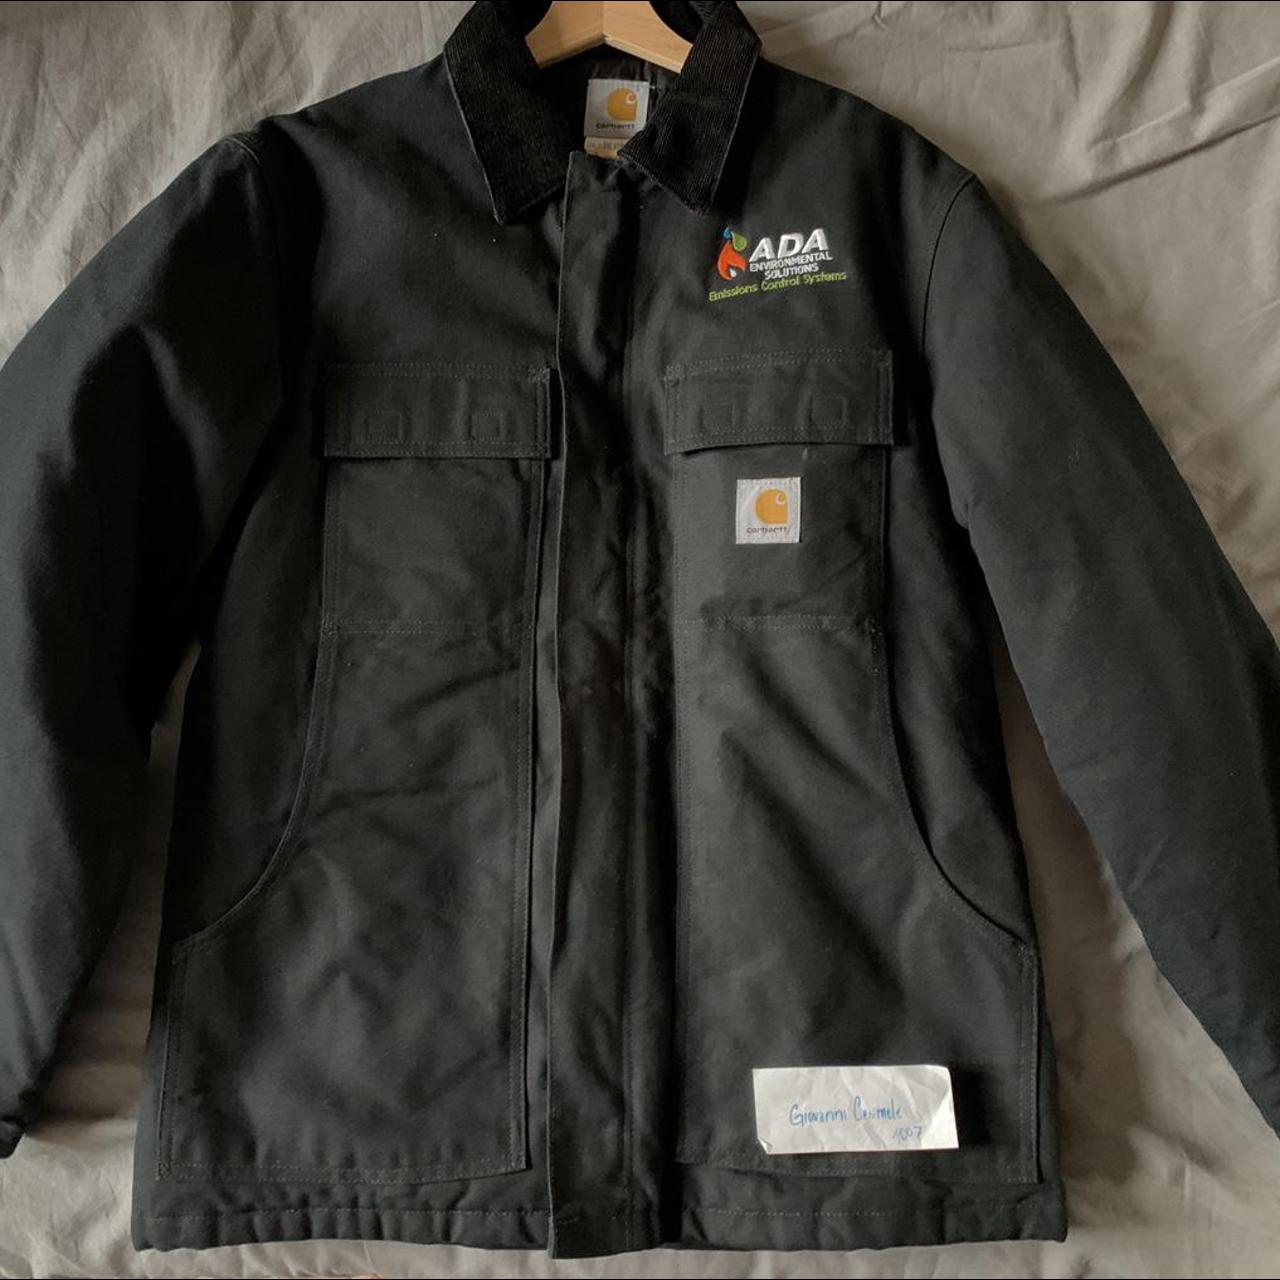 Carhartt Vintage Jacket: Perfect condition for a... - Depop